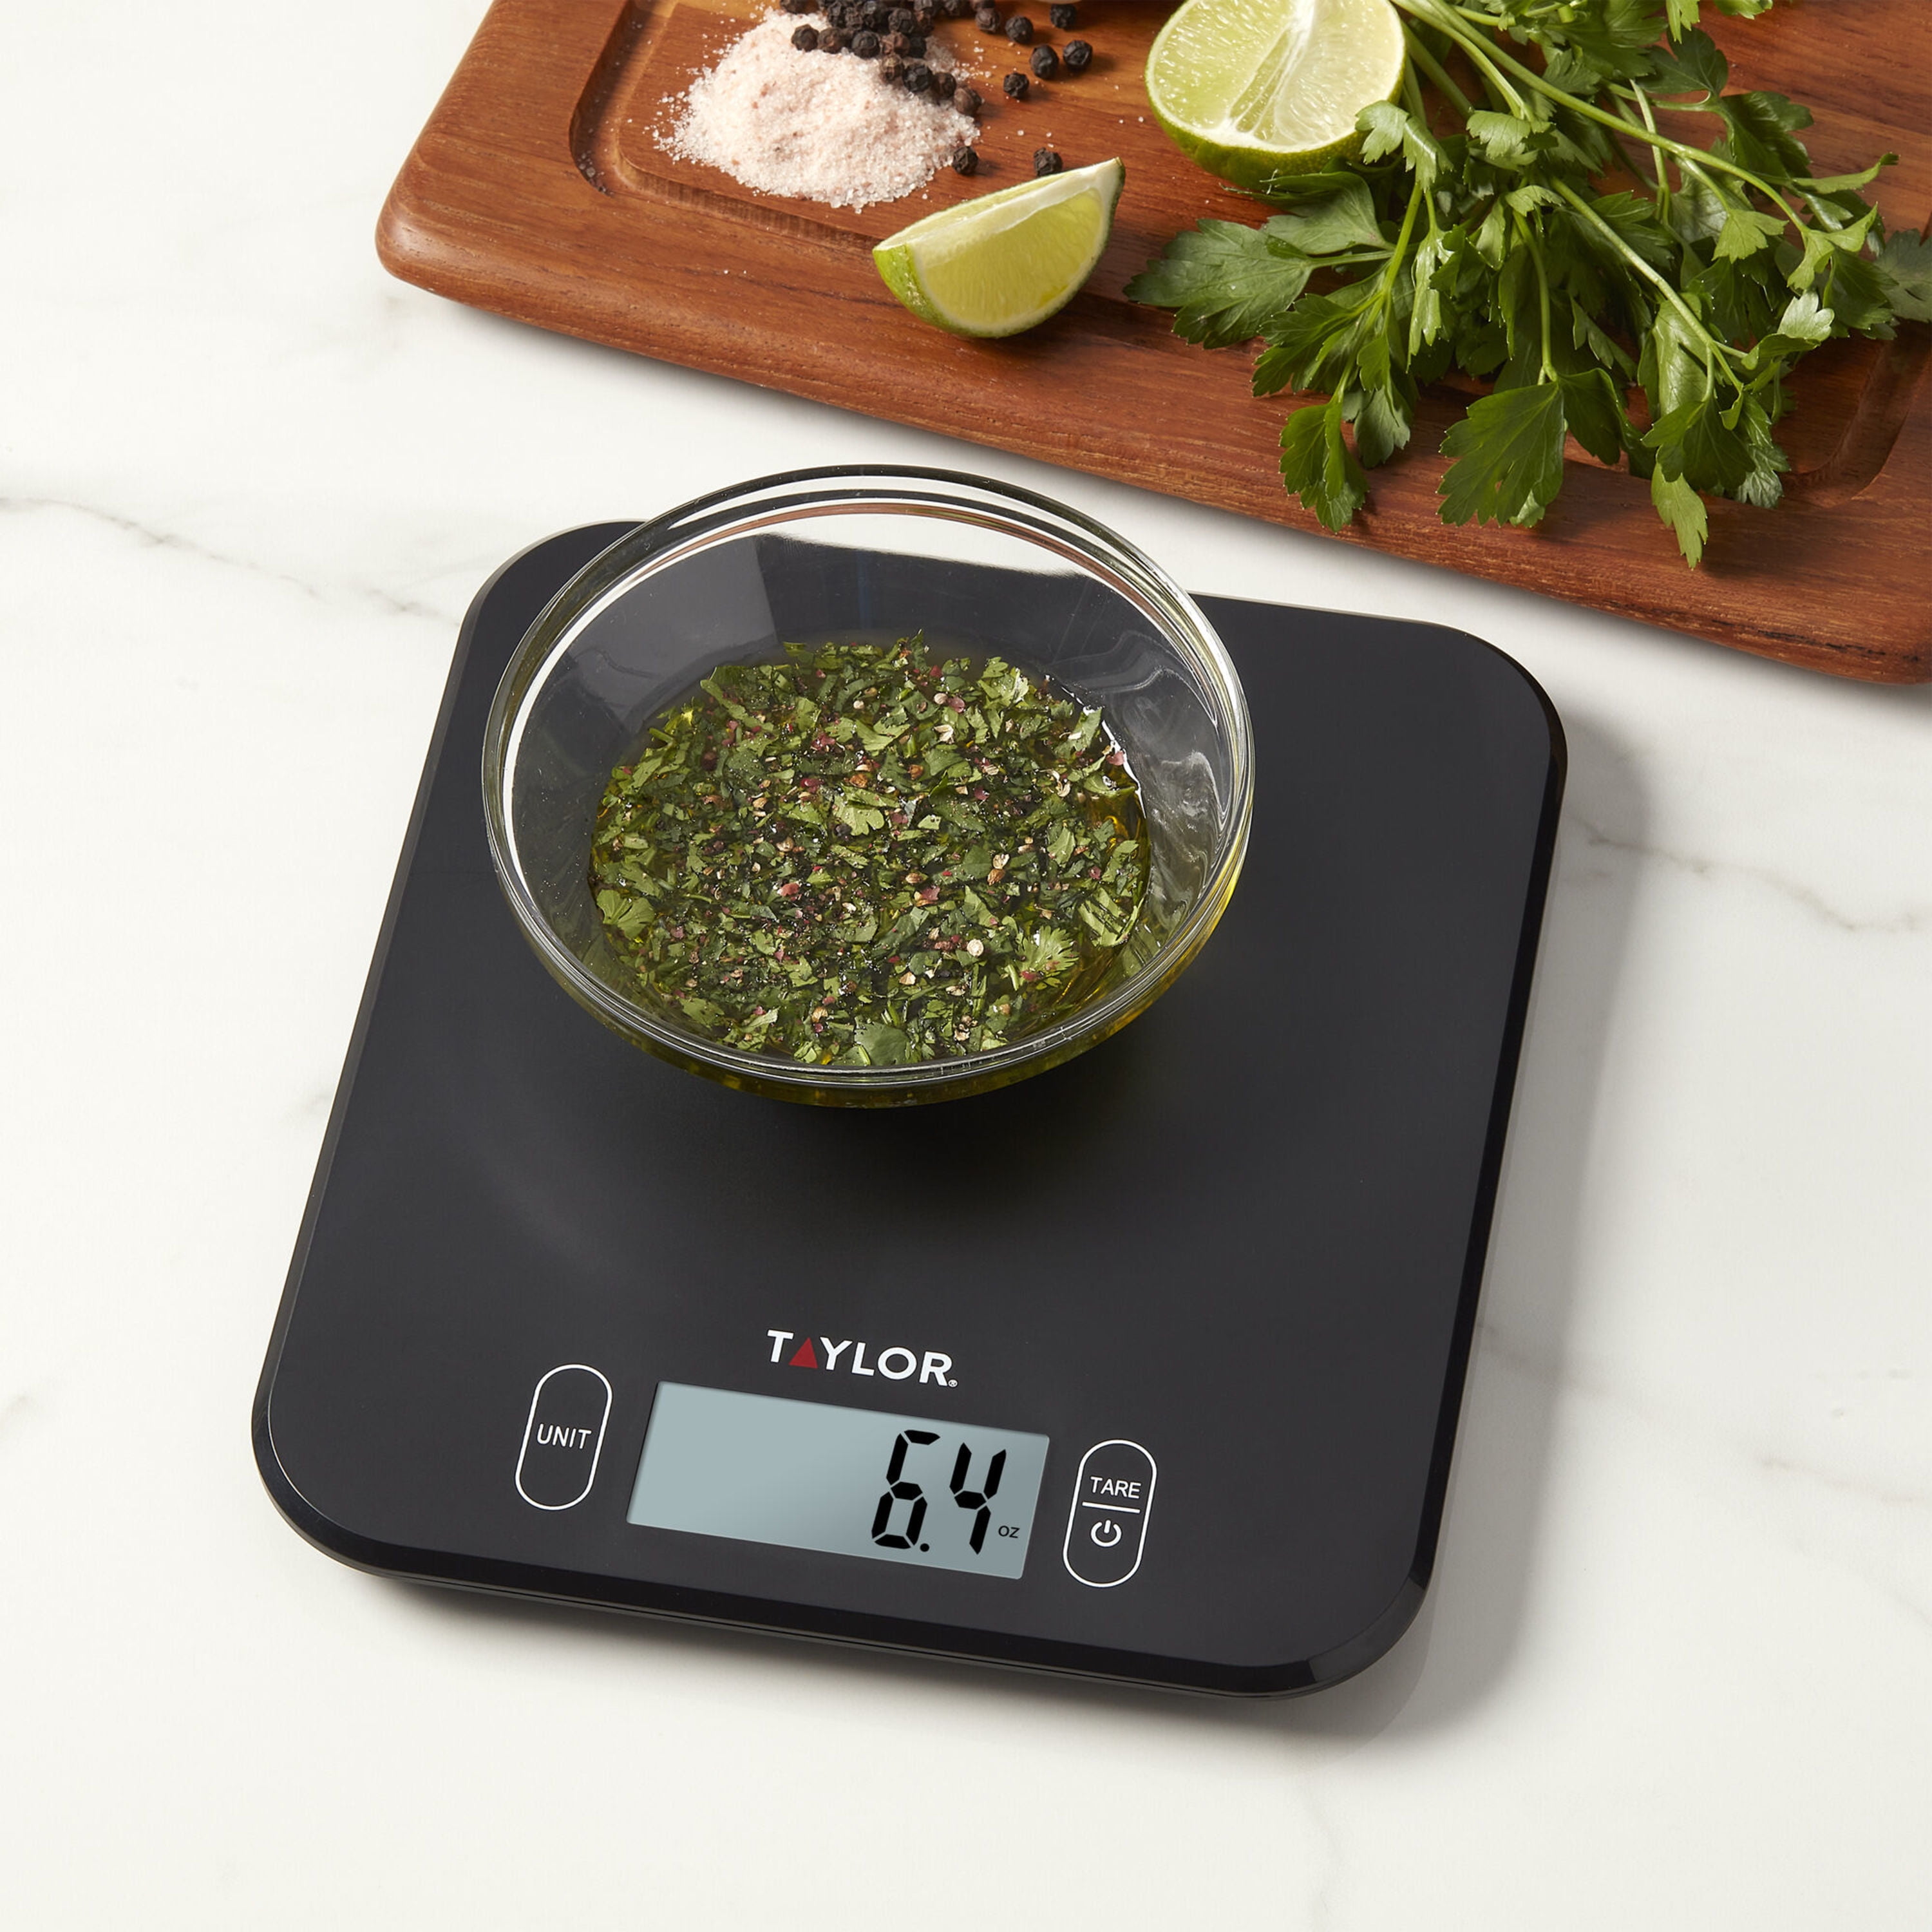 Taylor 11lb Digital Kitchen Scale and Food Scale with Removable Stainless Steel Tray Cooking, Baking, Meal Prepping White 5273821